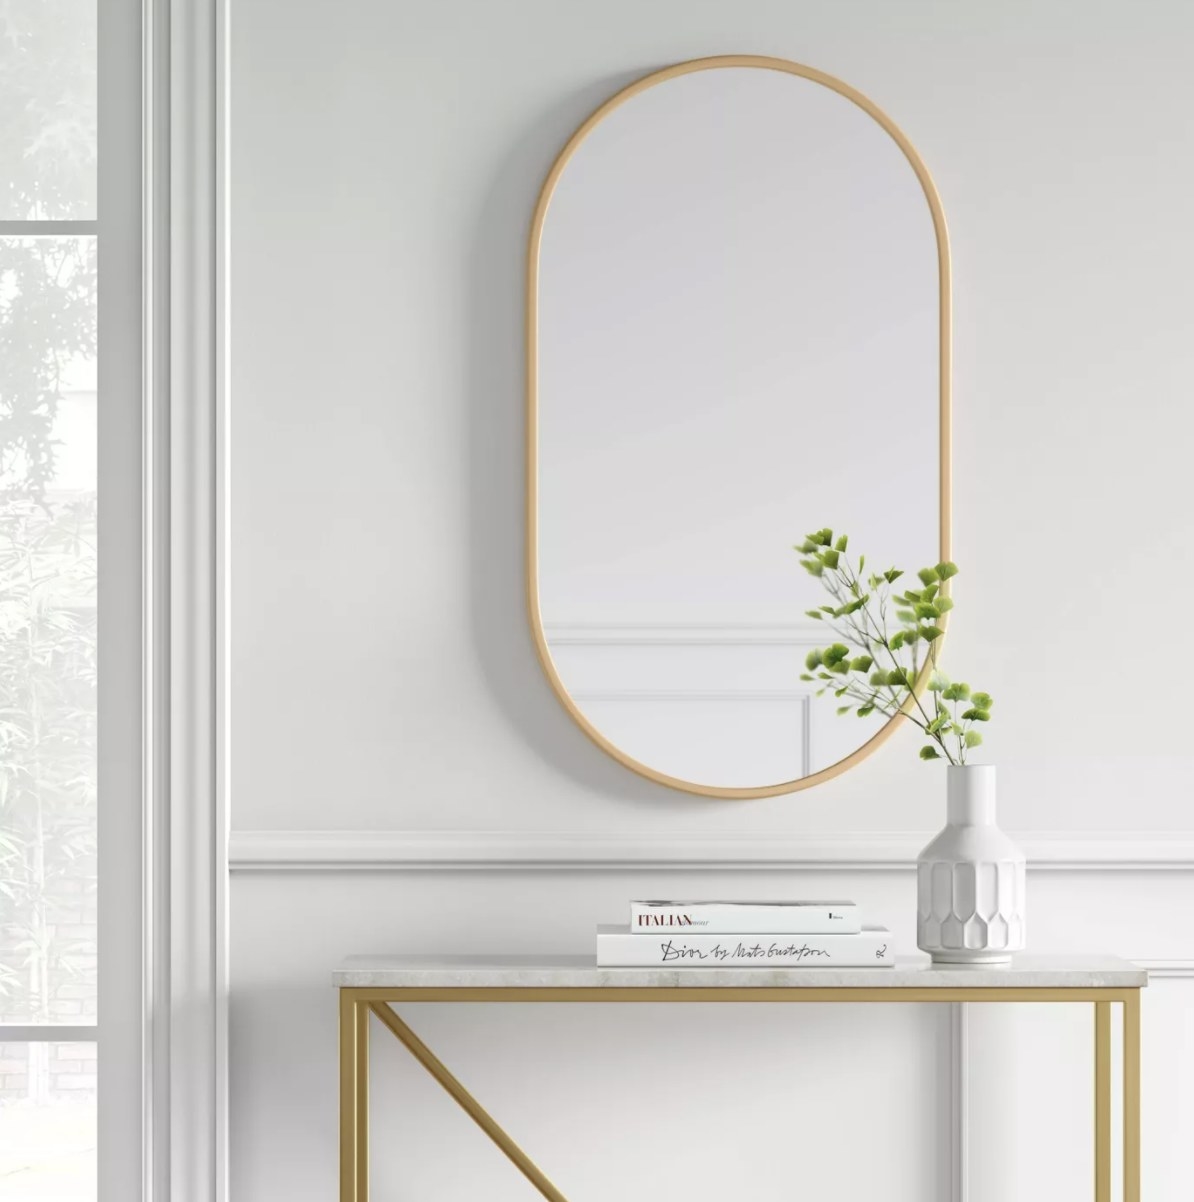 The brass oval mirror is hung in a bright white room